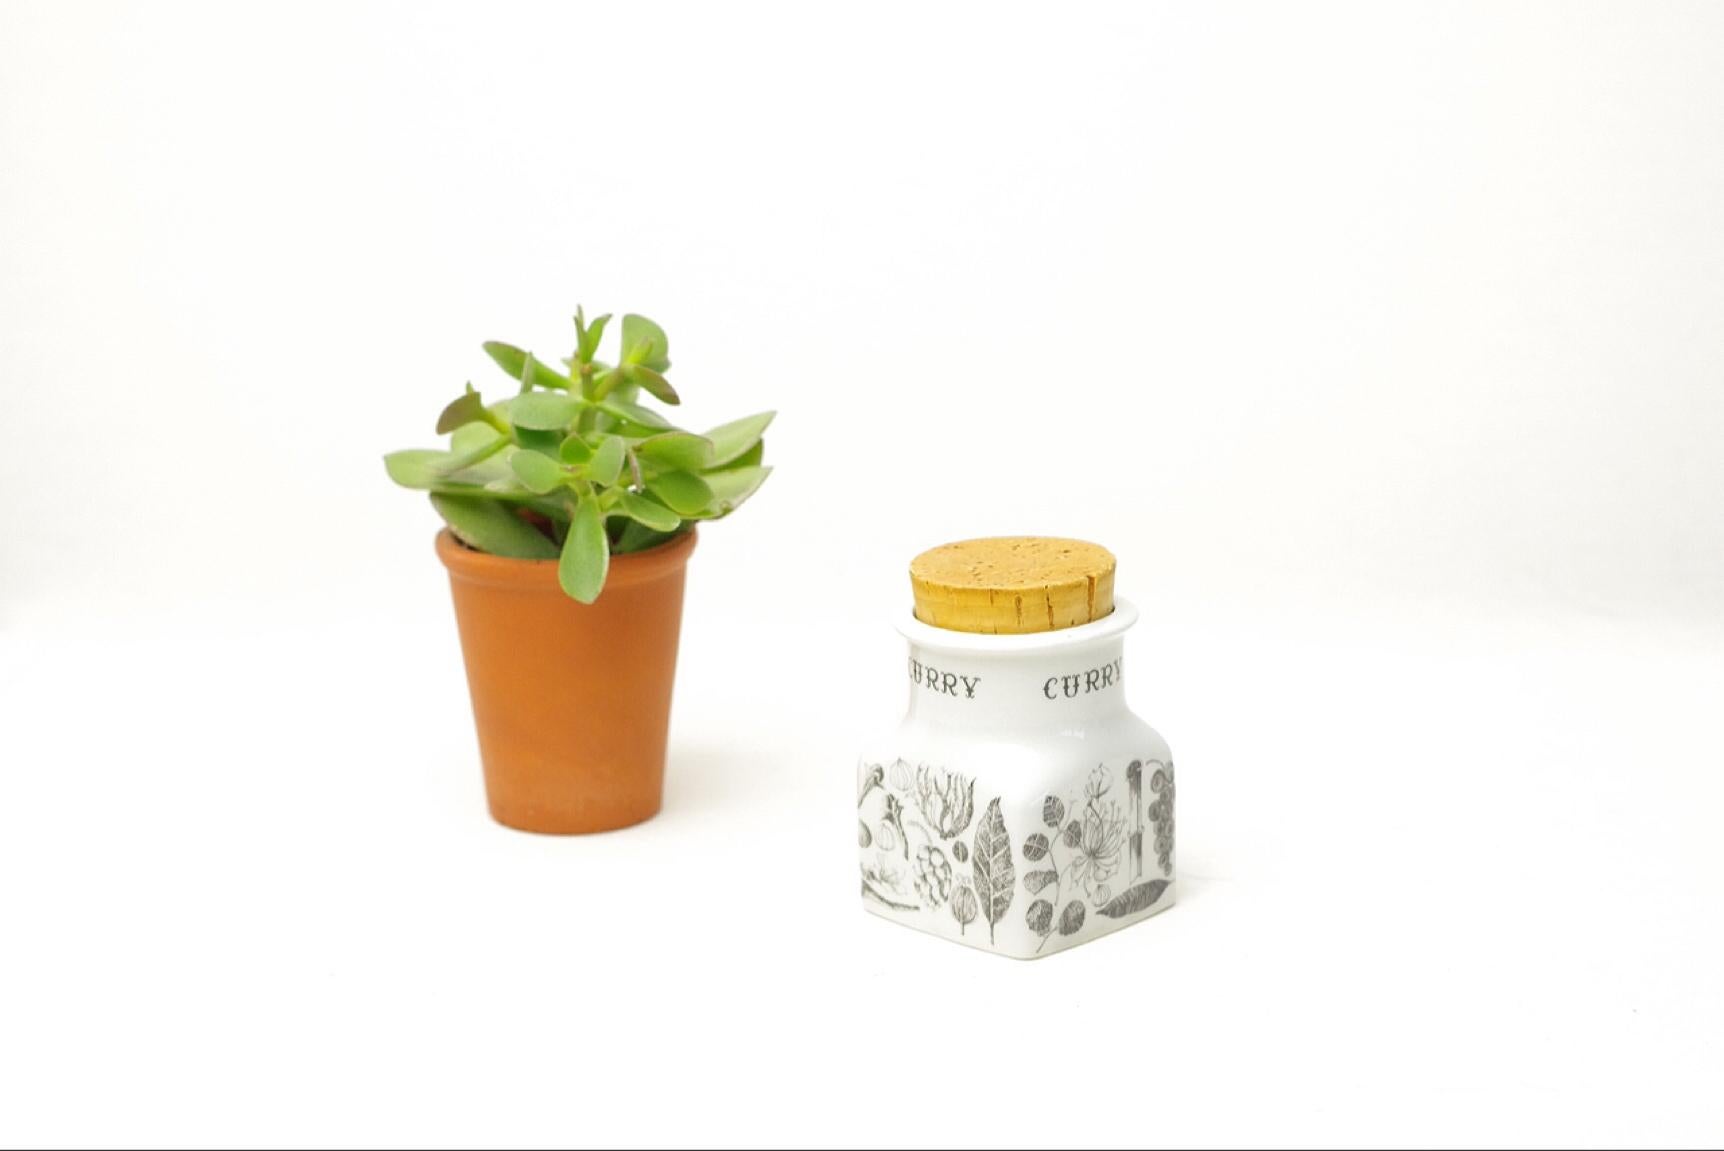 Product Description:
We have on offer this curry spice pot. At first glance, I was fascinated by the cuteness of these spice pots of this serie, but when I looked closely the design appeared to be very delicate as well. Lining up all the spice pots